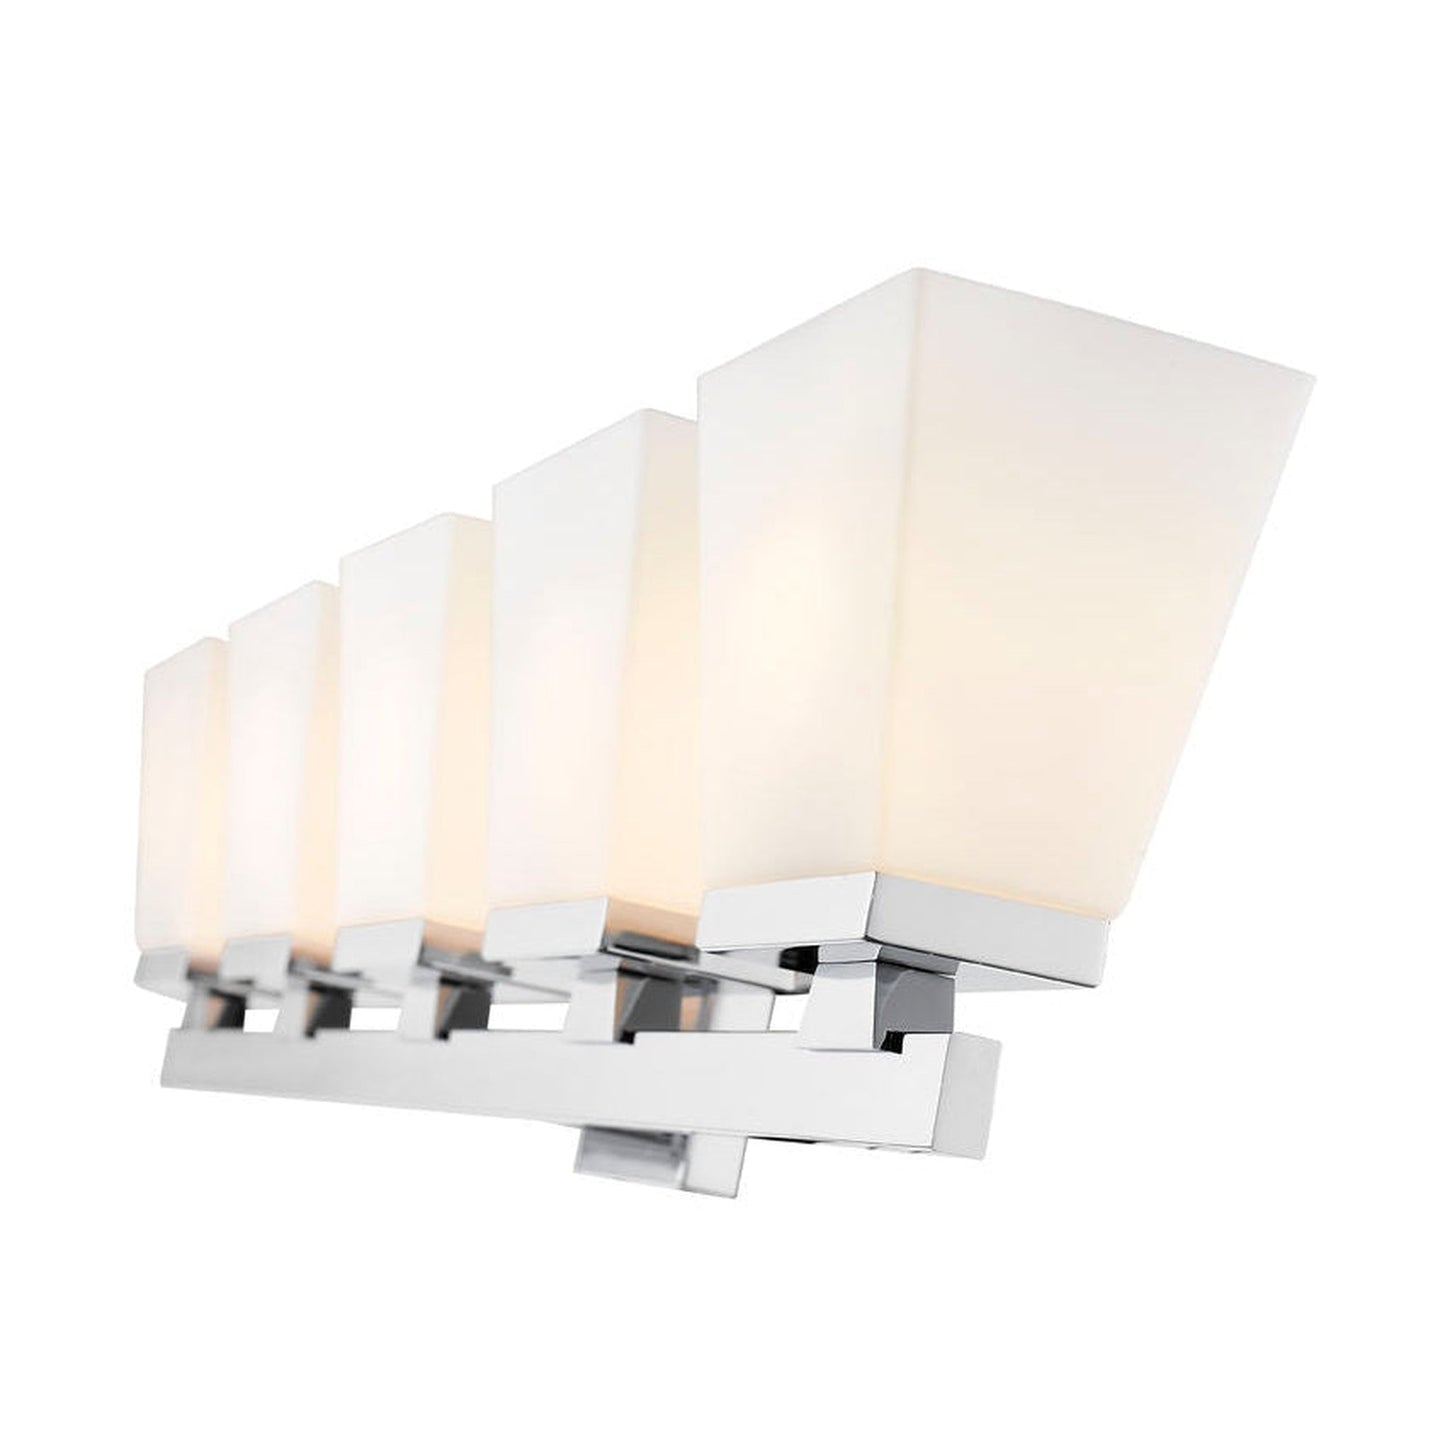 Z-Lite Astor 36" 5-Light Chrome Vanity Light With Etched Opal Glass Shade